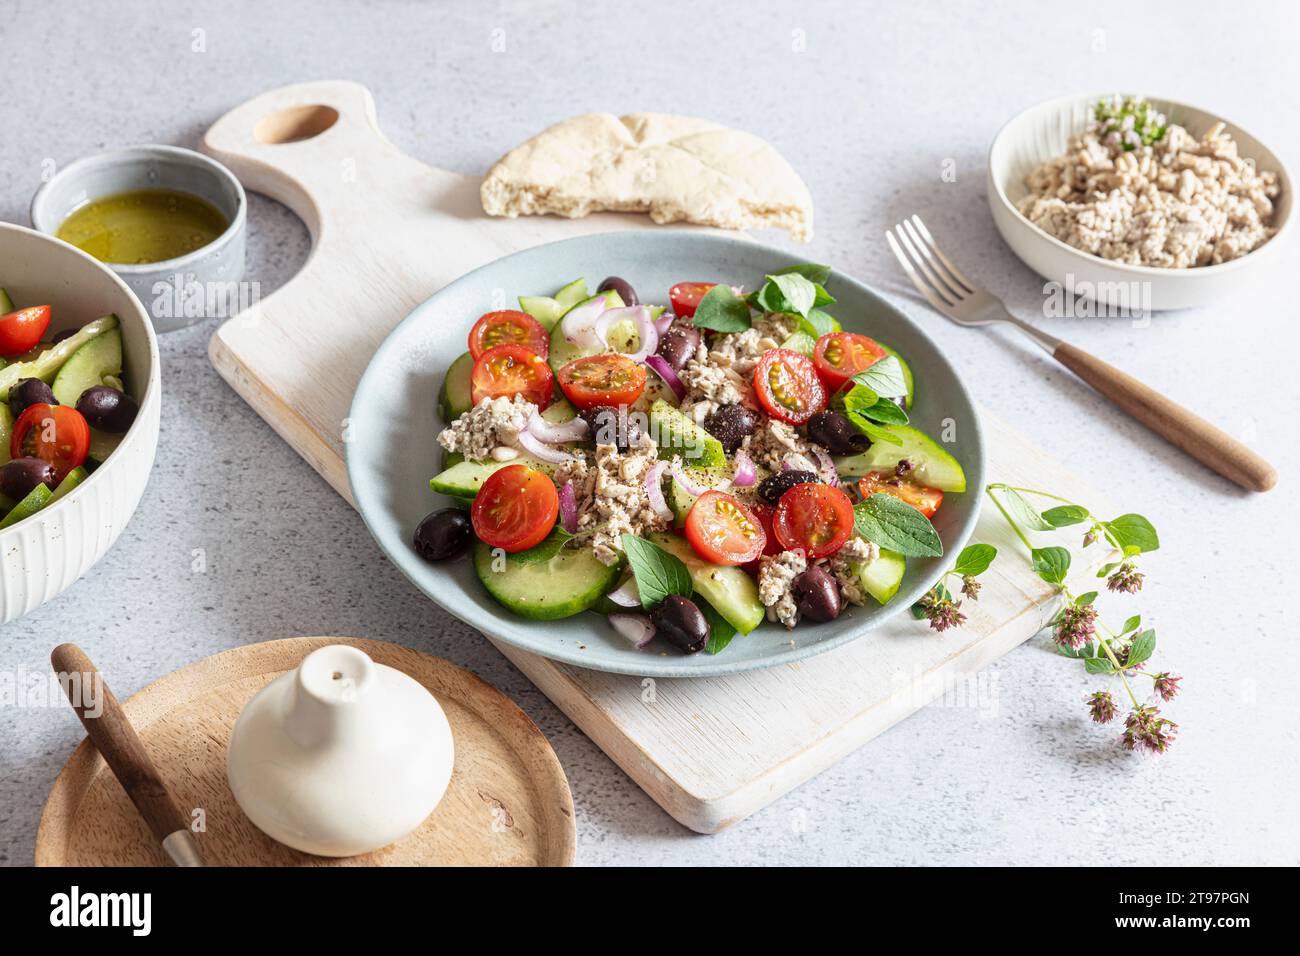 Greek salad with vegan feta cheese made from sunflower seeds Stock Photo